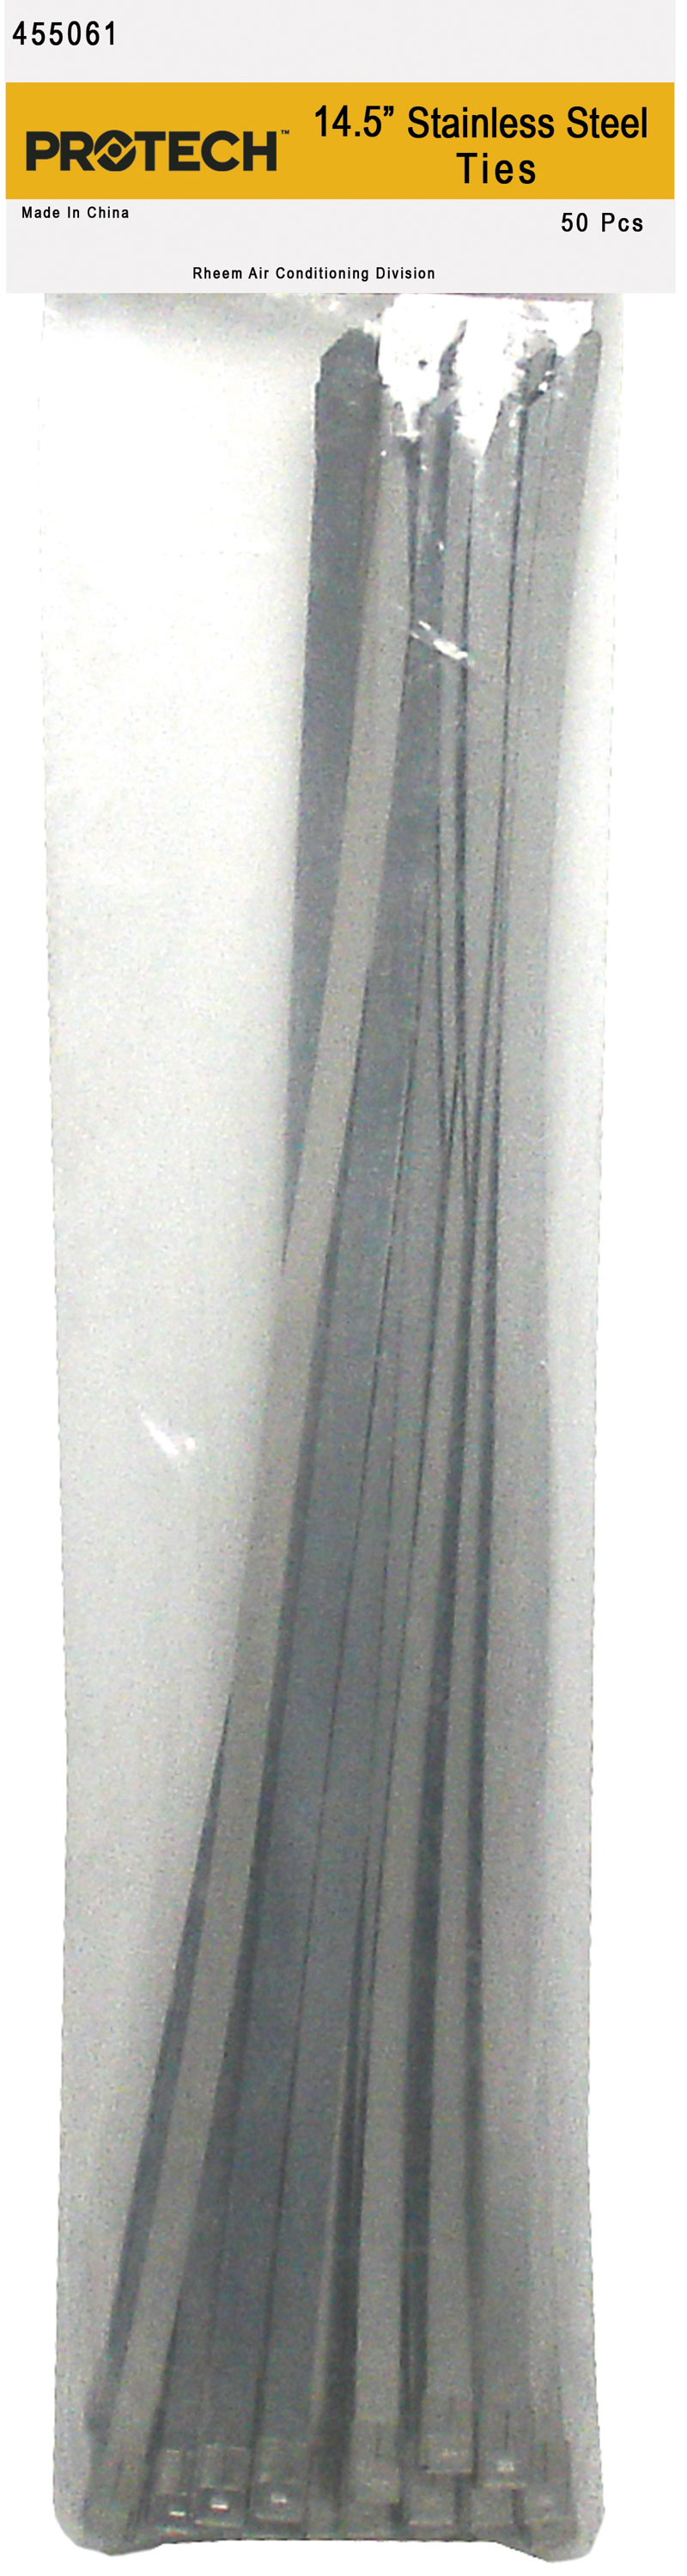 ds14.5in Stainless Steel tie 250 lb-50pk